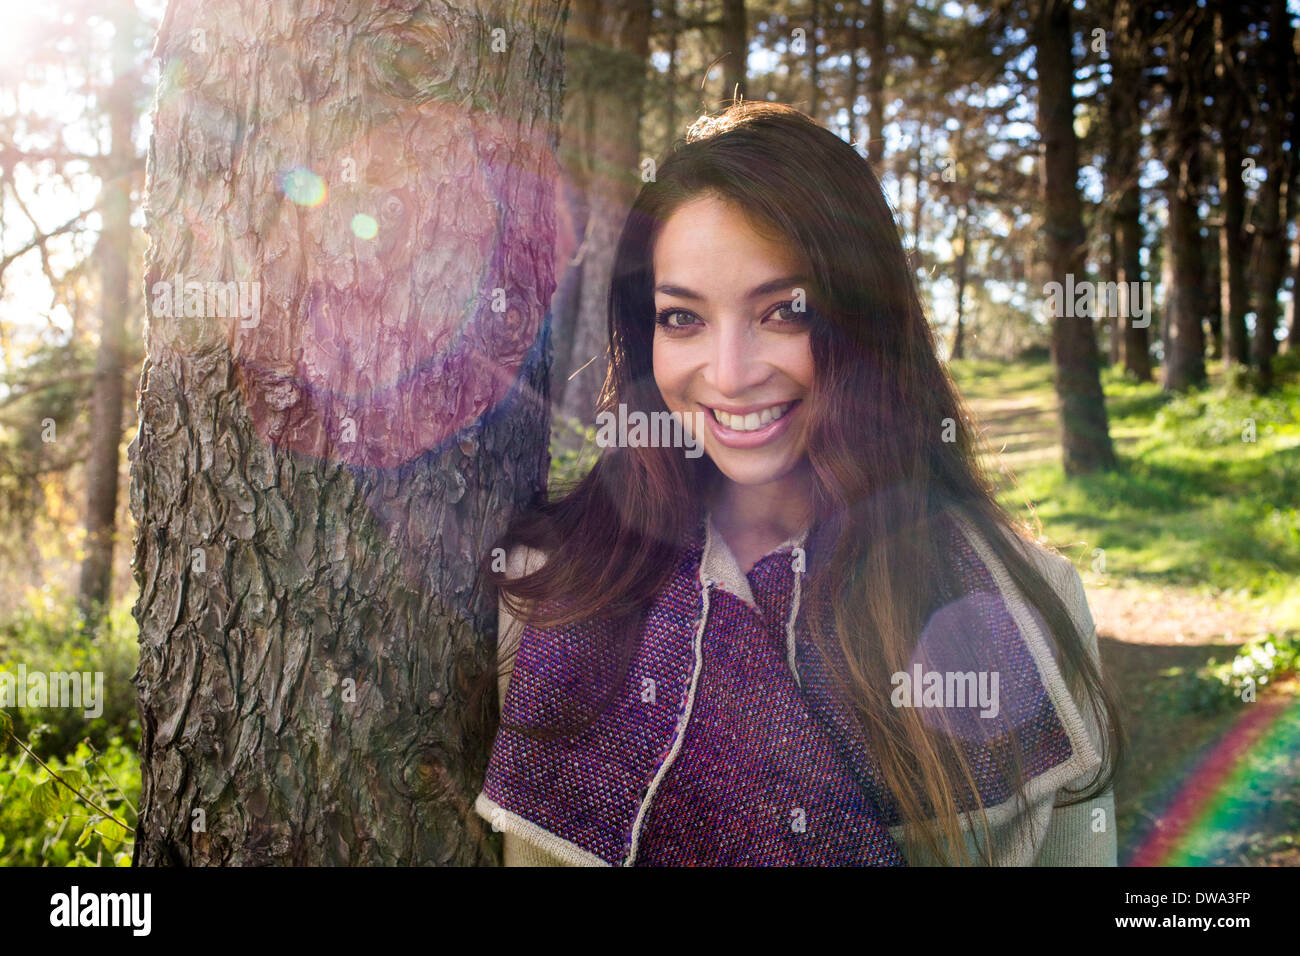 Portrait of young woman in sunlit forest Stock Photo